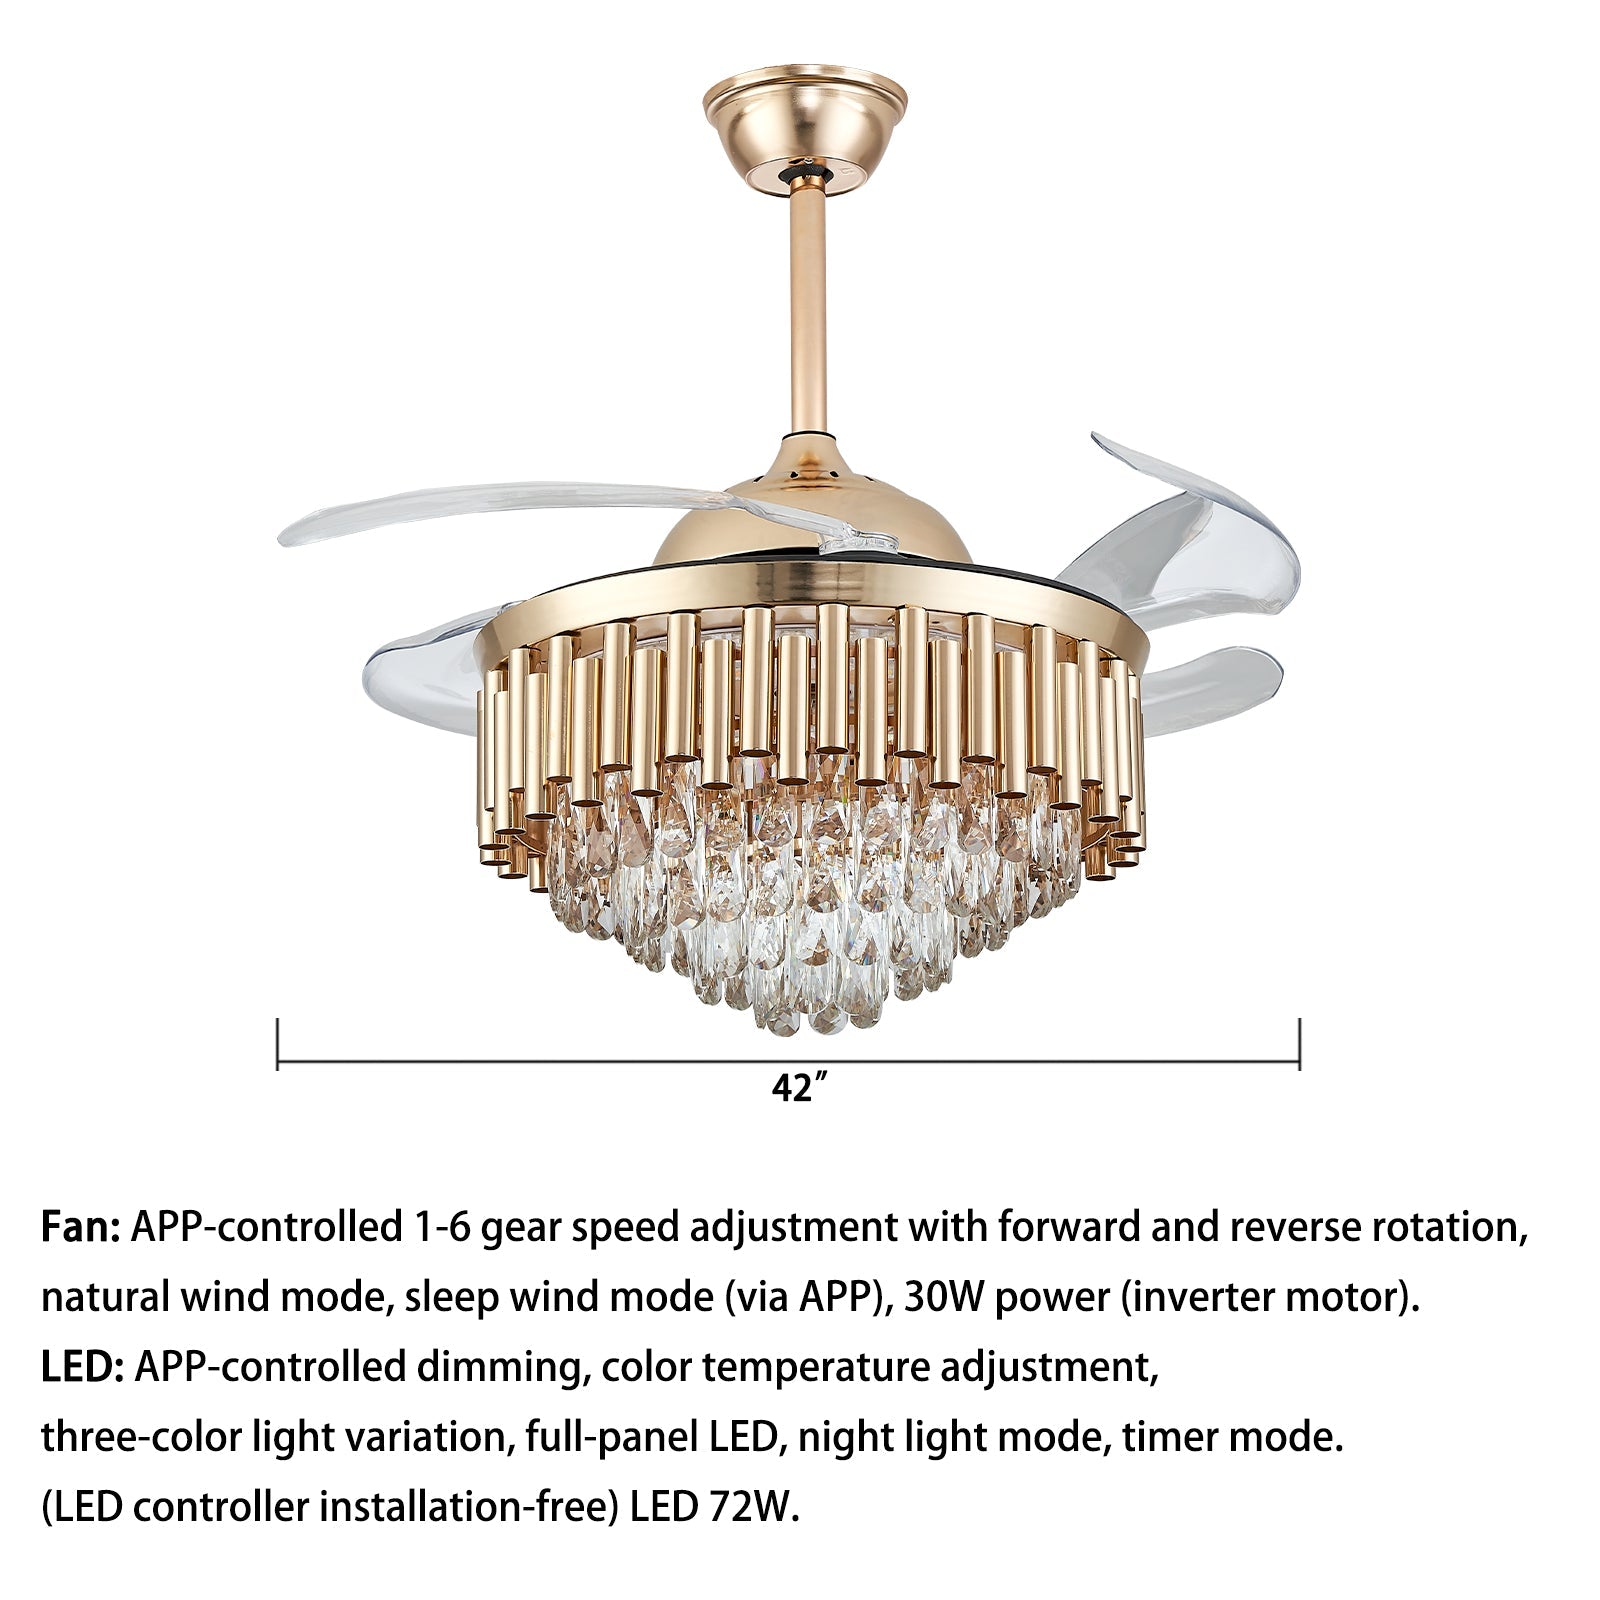 Alvin 42" Crystal LED  Dimmable Ceiling Fan Chandelier For Dining Room, APP Control, 6-Speed